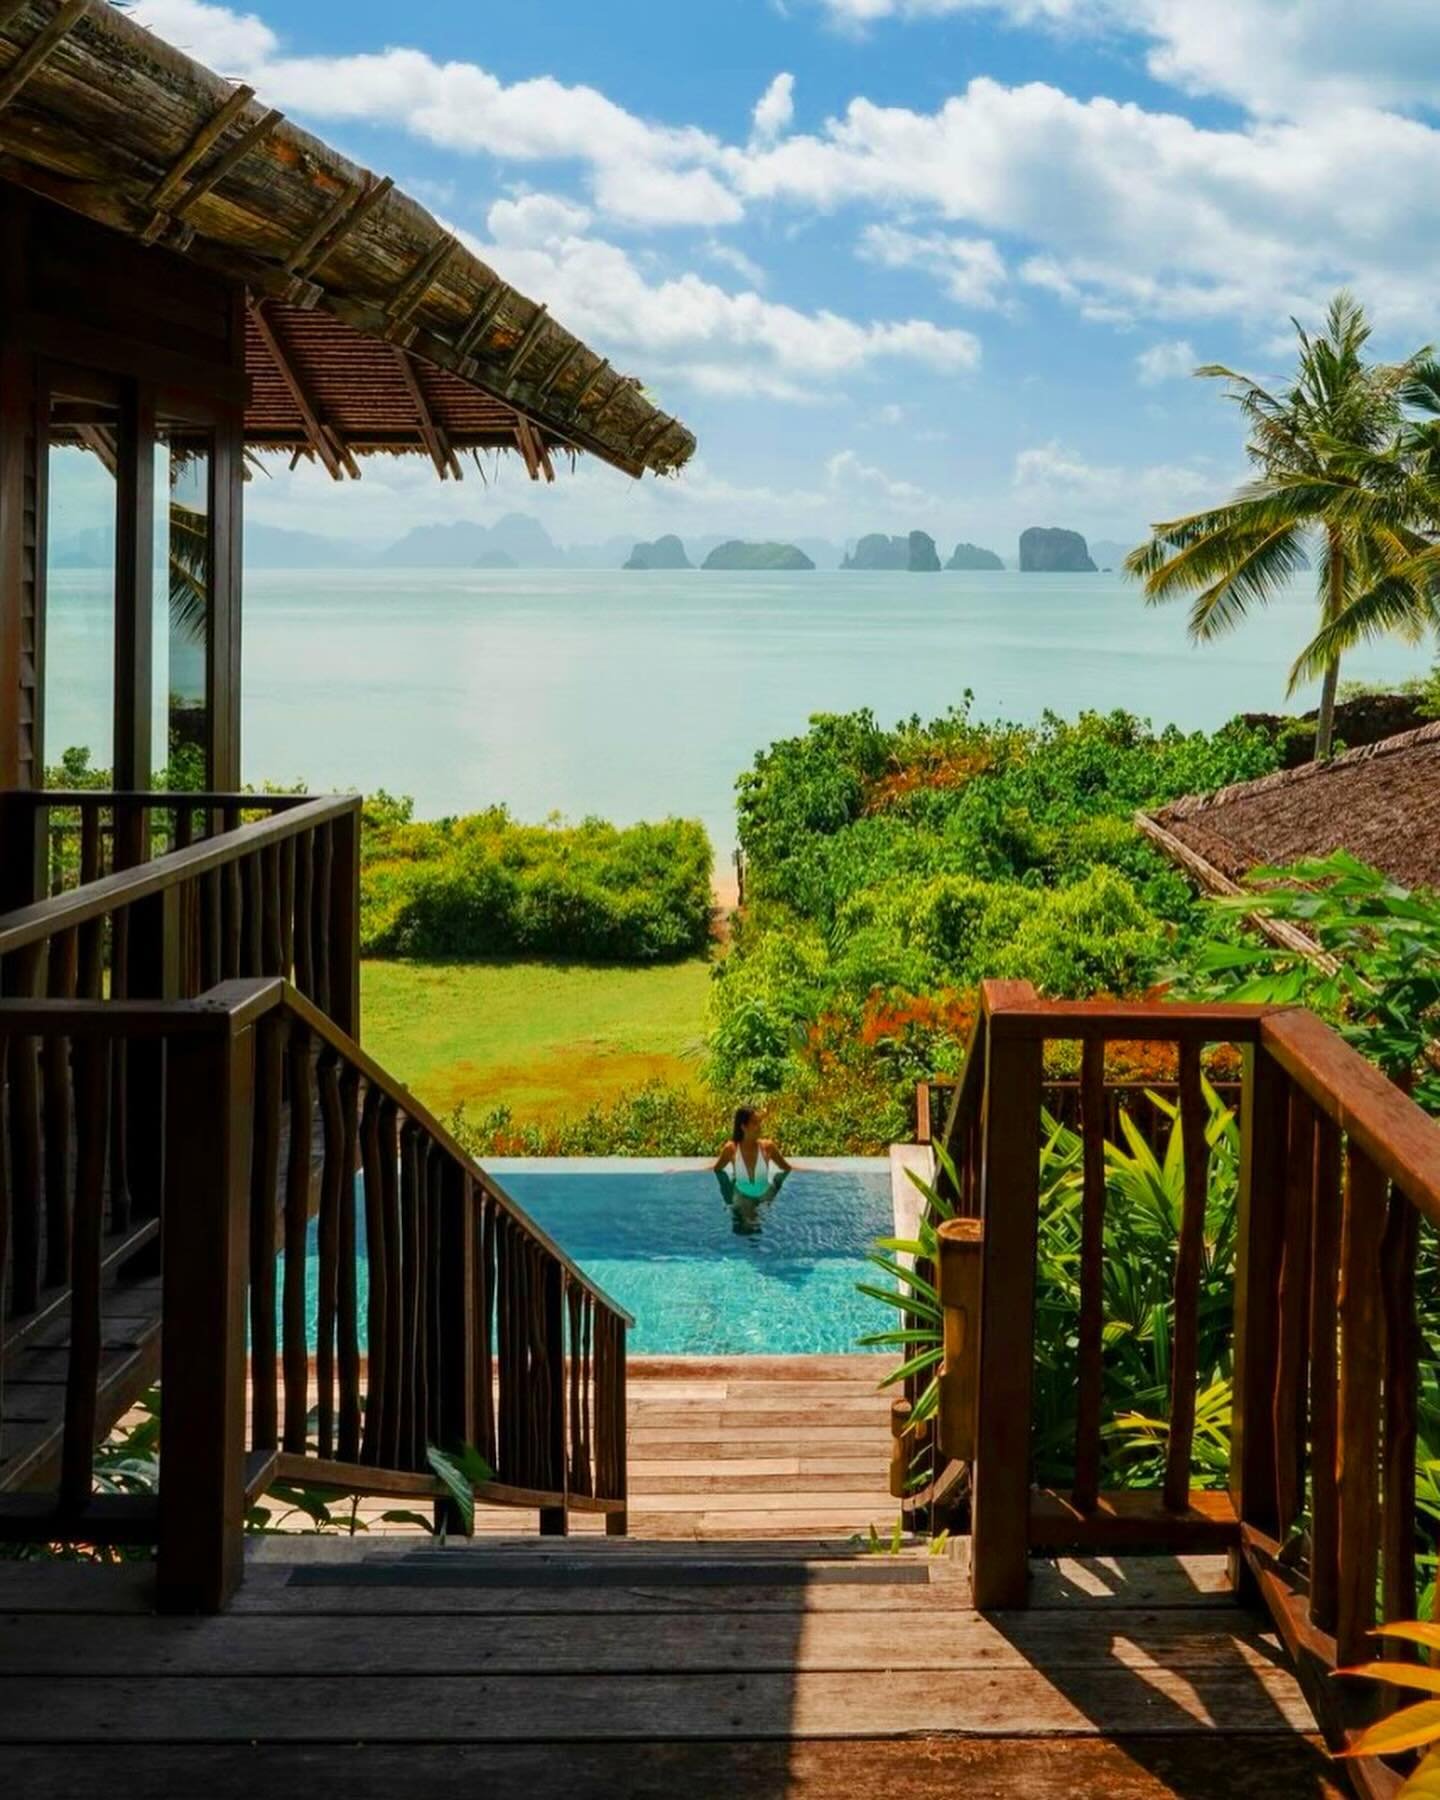 Ideal escape in tropical settings. With some of the best seascapes you&rsquo;ll see @sixsensesyaonoi 

#theaspirationgroup #travel #events #lifestyle #luxury #aspiremore #design #hideout #escape #luxurylifestyle #golf #spa #aspiremore #wanderlust #in